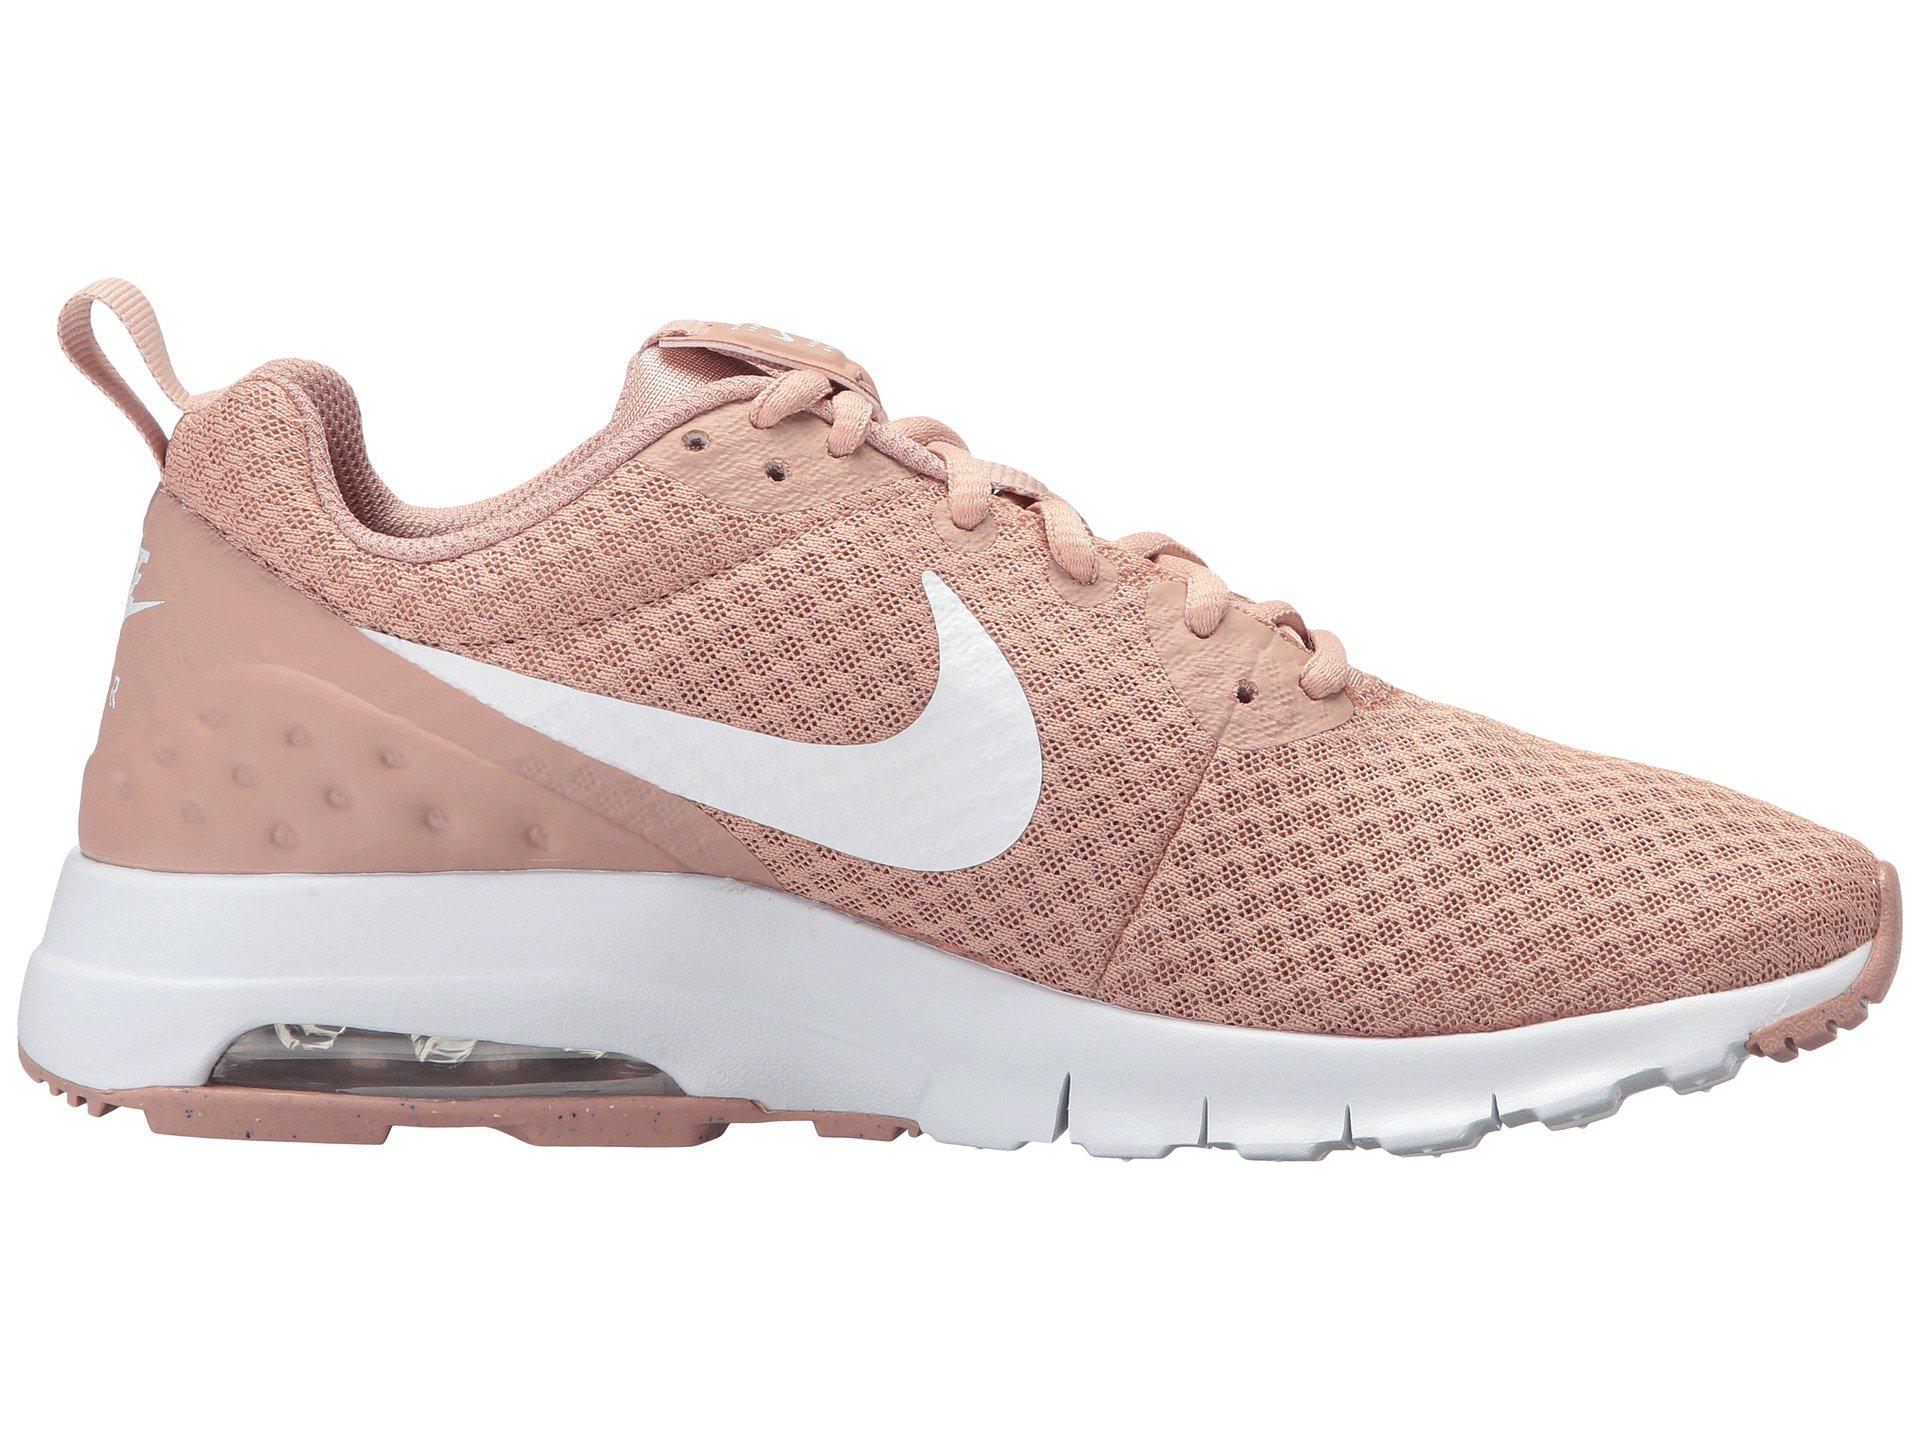 Nike Rubber Air Max Motion Lw Running Shoe in Particle Pink/White (Pink) -  Lyst